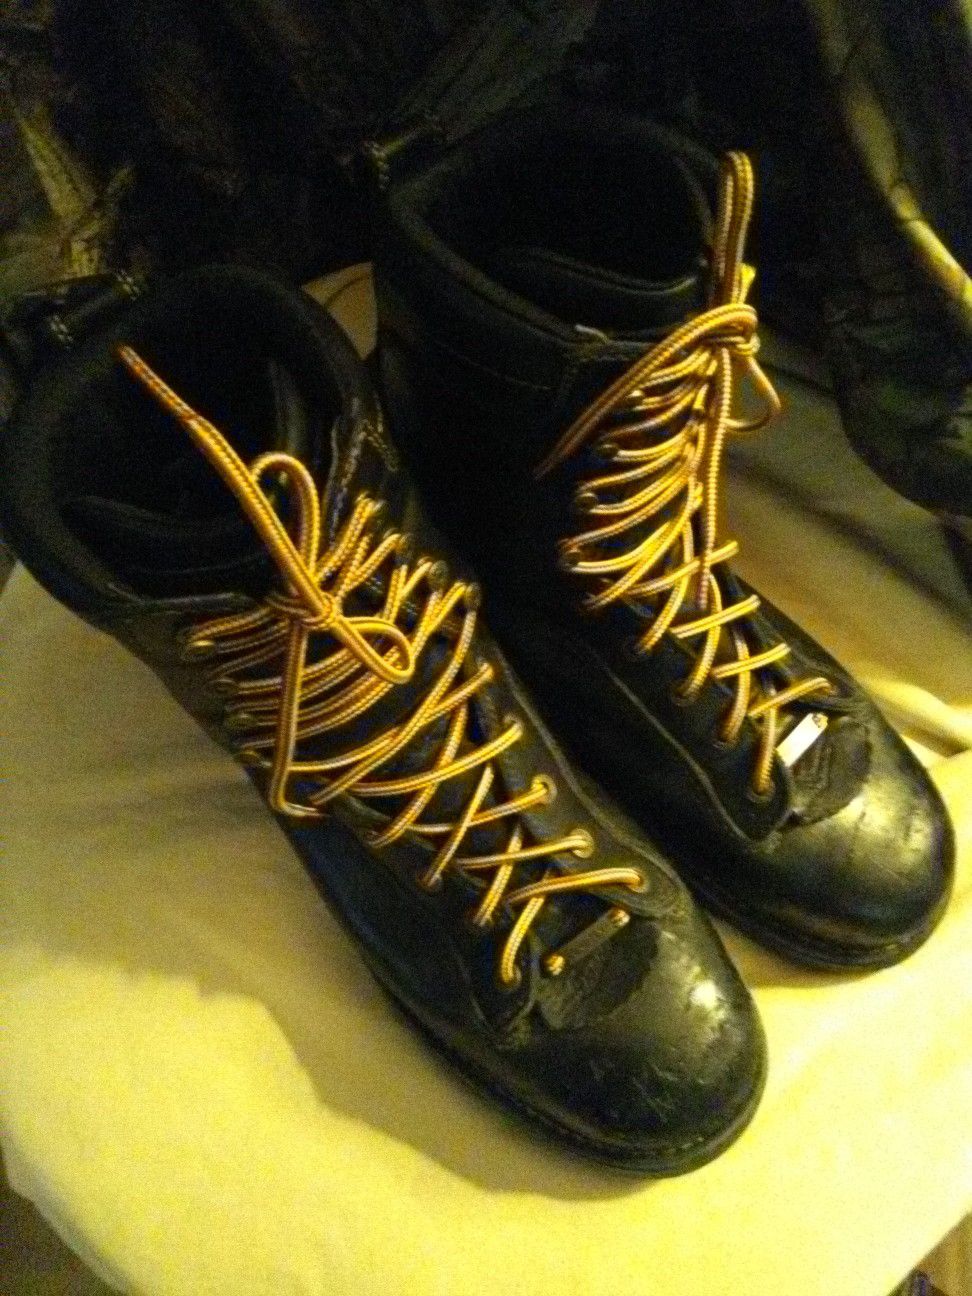 DANNER QUARRY 8" SIZE 12 MENS GORE-TEX WORK BOOTS